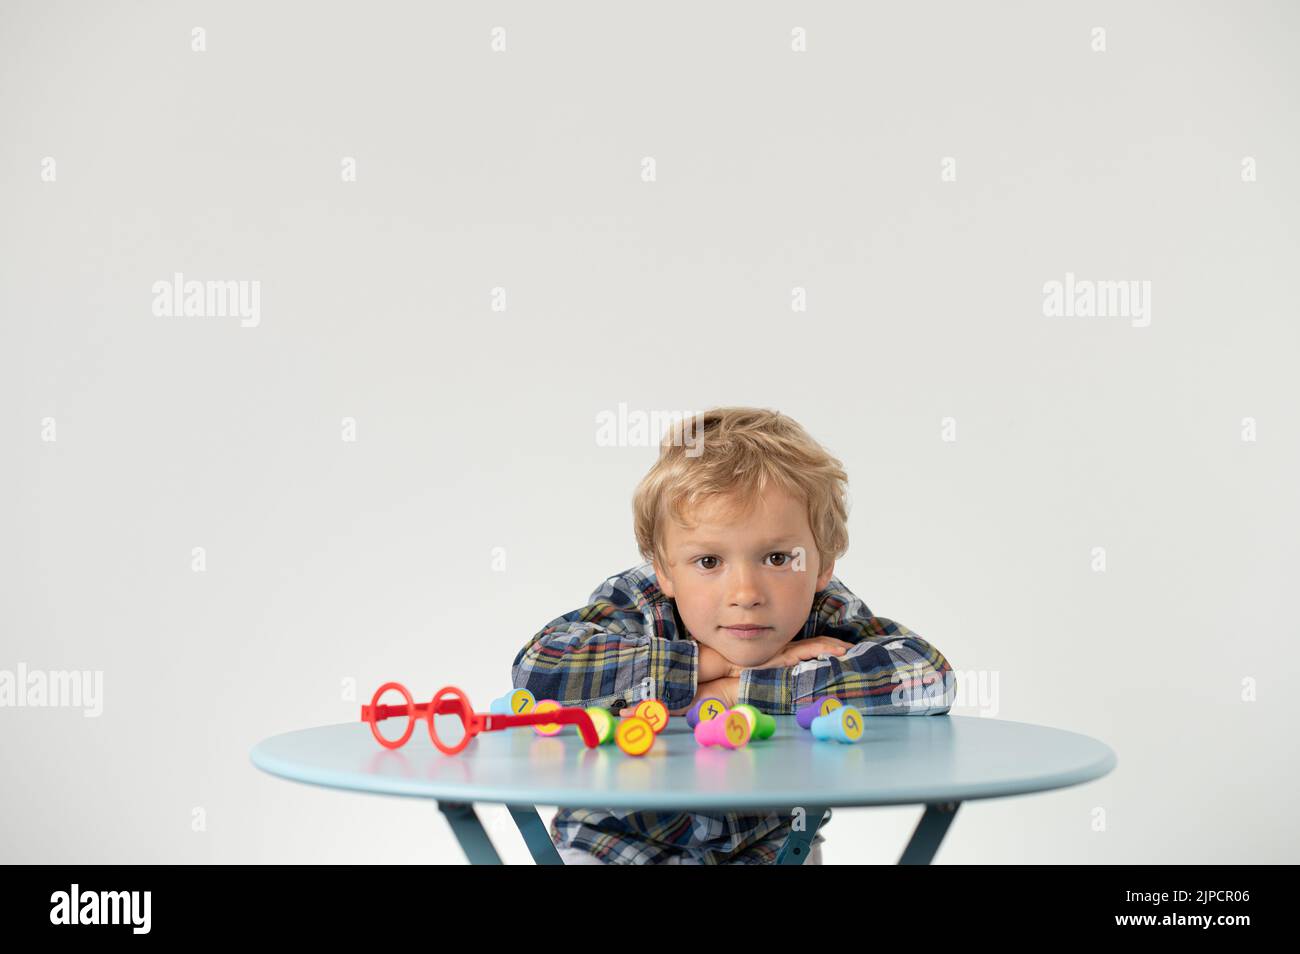 Boy sitting at a table, showing lotto number, school grade Stock Photo